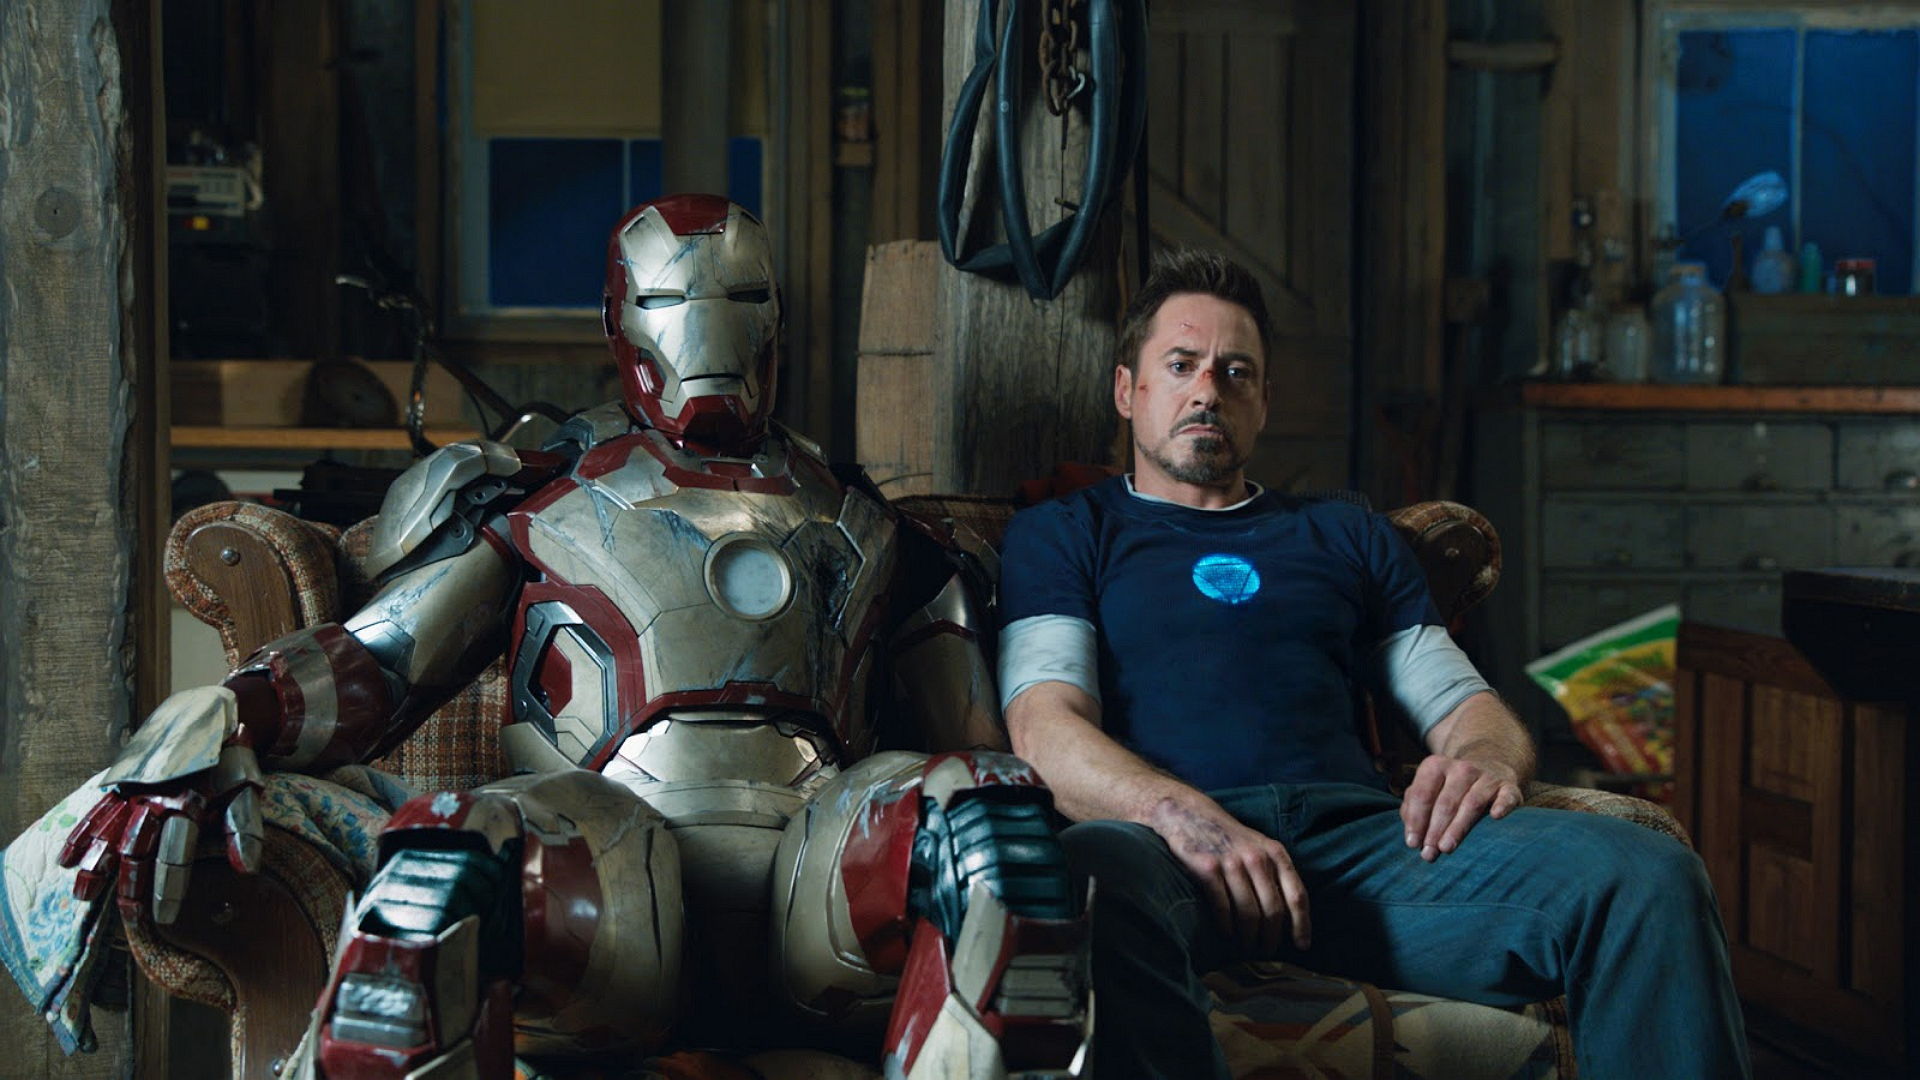 If You’ve Seen 20/39 of the Films That’ve Made Over $1 Billion, You’re a Real Movie Buff Iron Man 3 (2013)